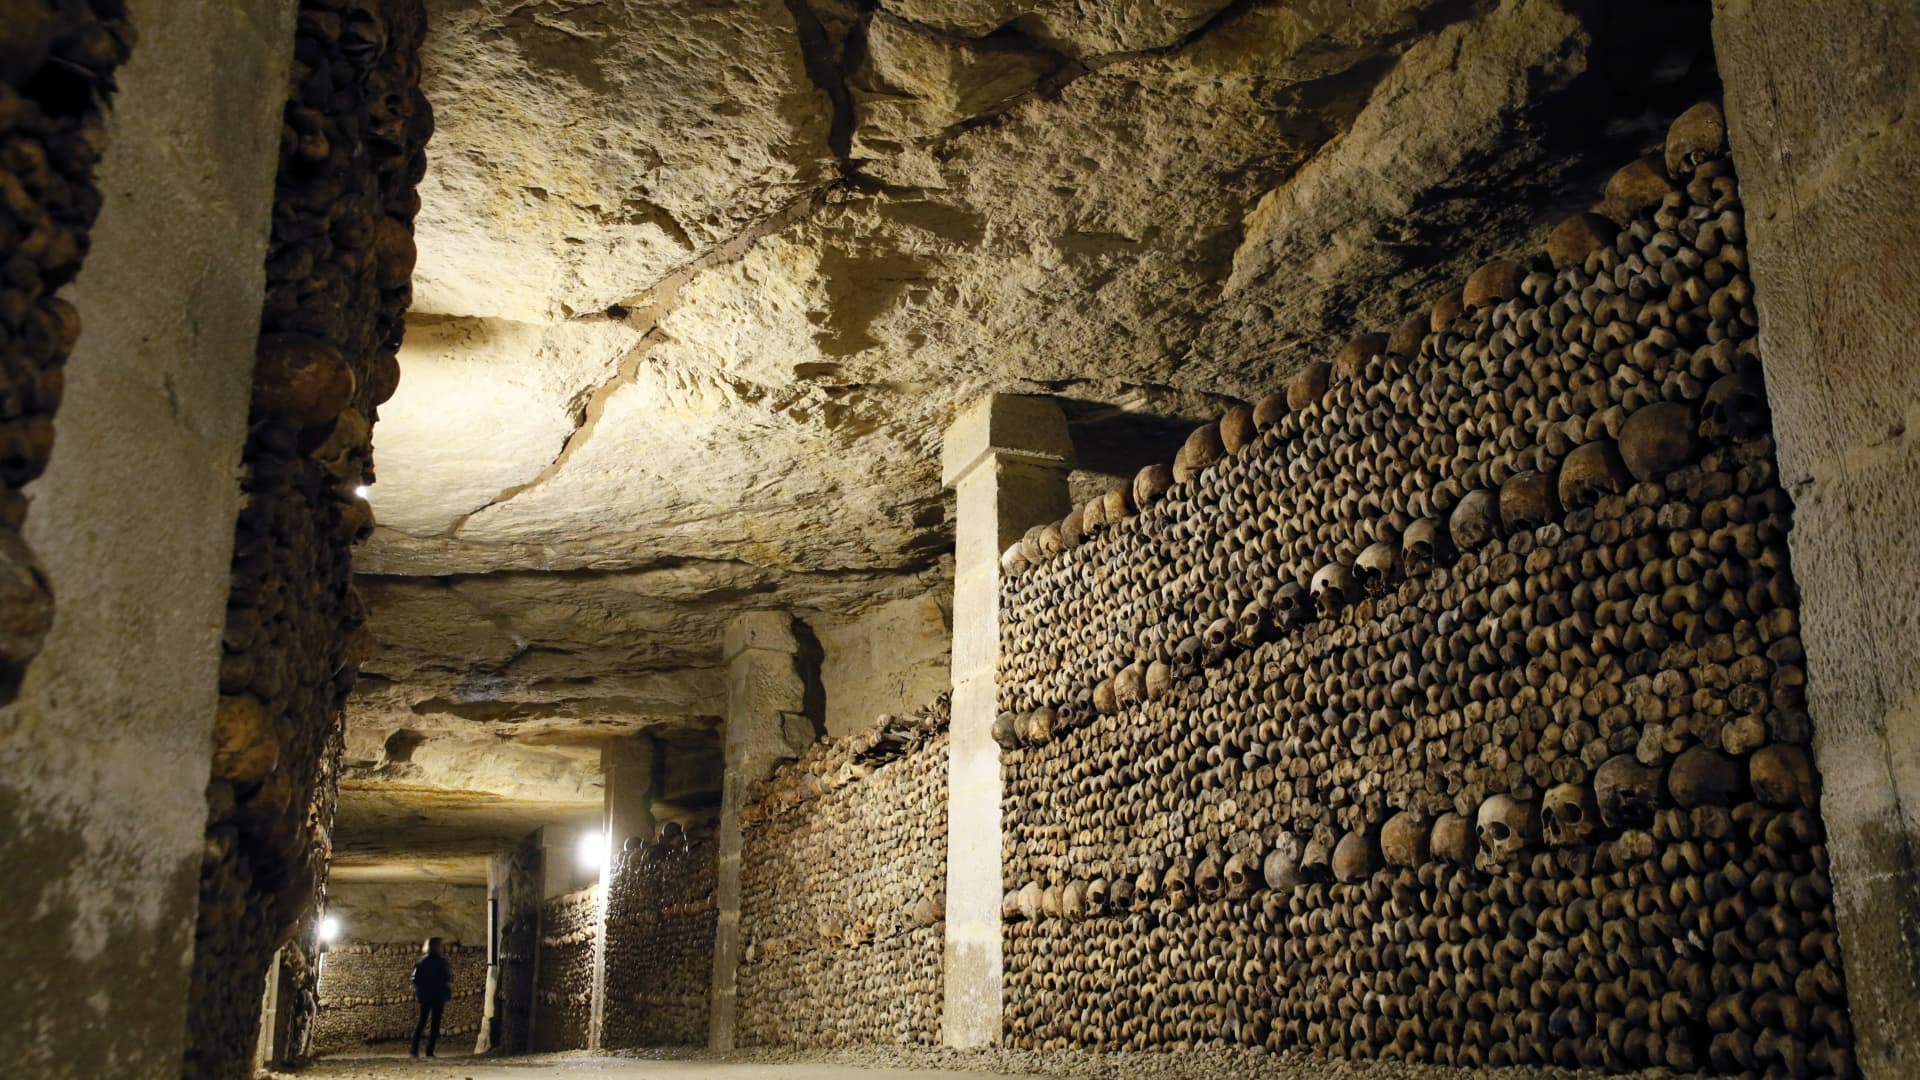 Crypto developers descend on Paris to talk code and party 65 feet underground in the Catacombs